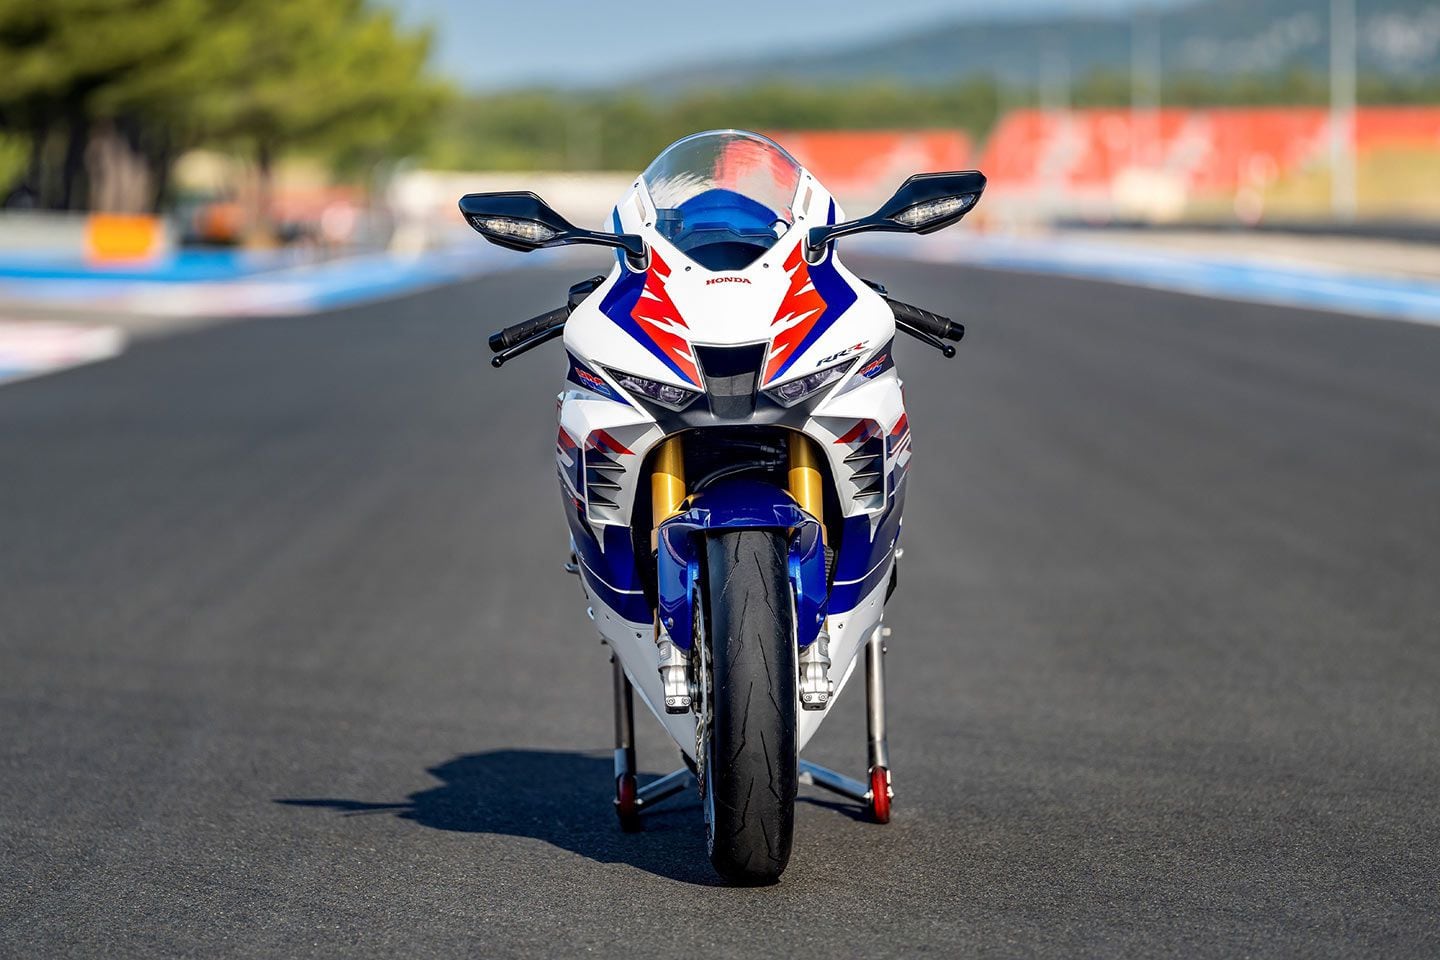 Last year, the CBR1000RR-R Fireblade SP celebrated 30 years since the original CBR1000RR was offered in Europe in 1992 (to be followed a year later in the US).